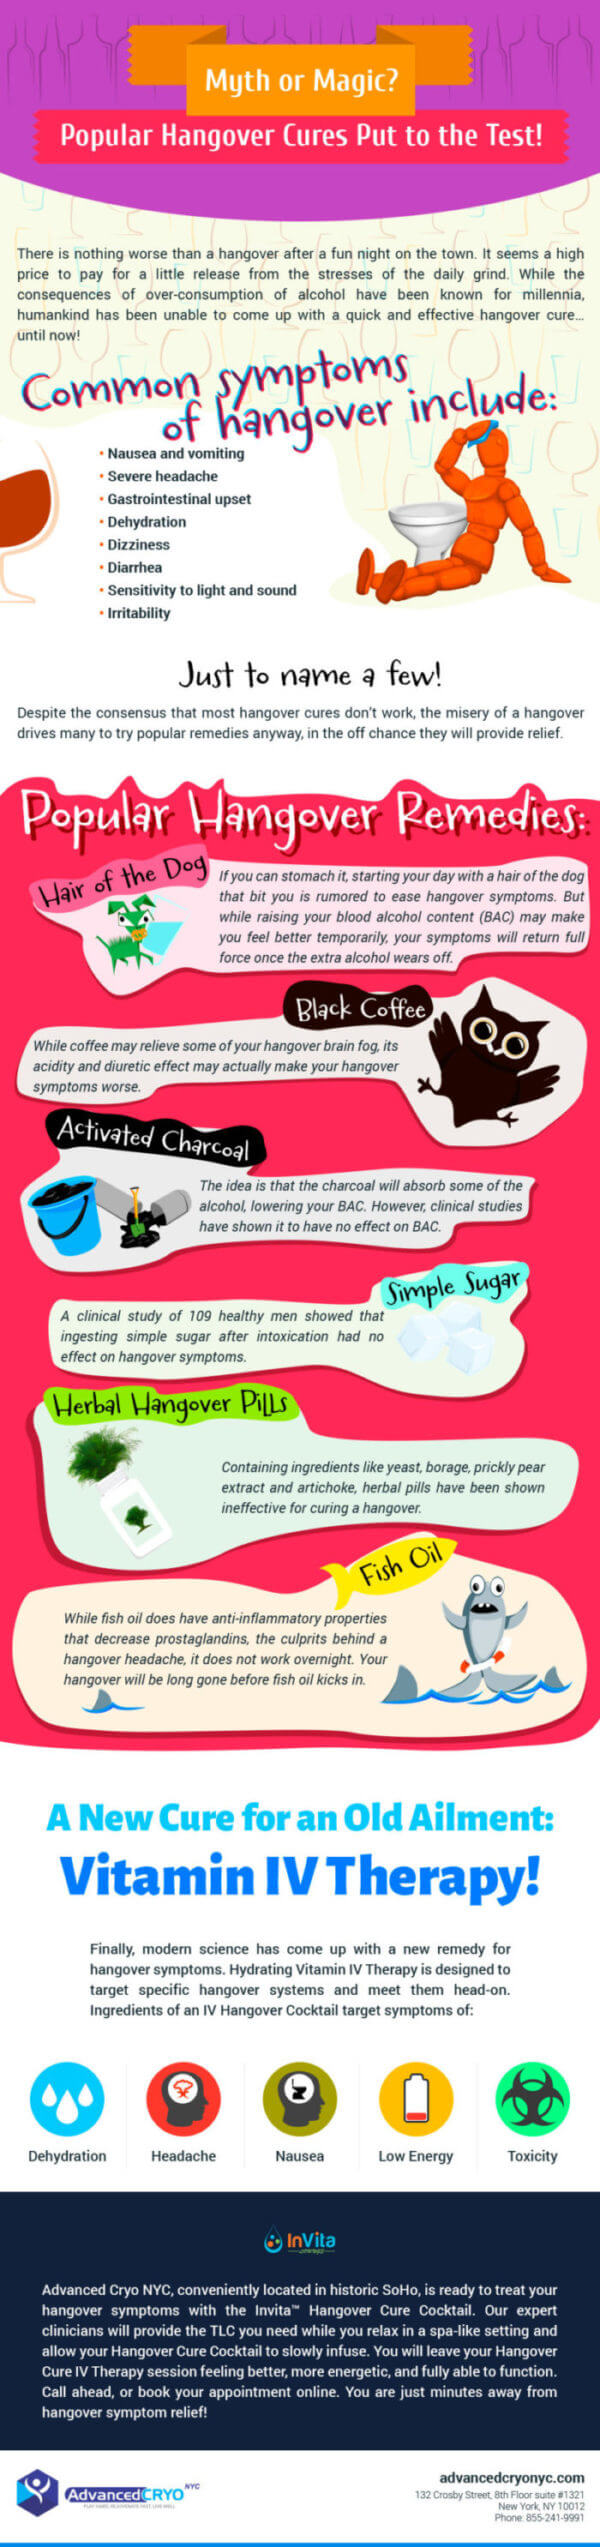 hangover-cures-tested-infographic-plaza